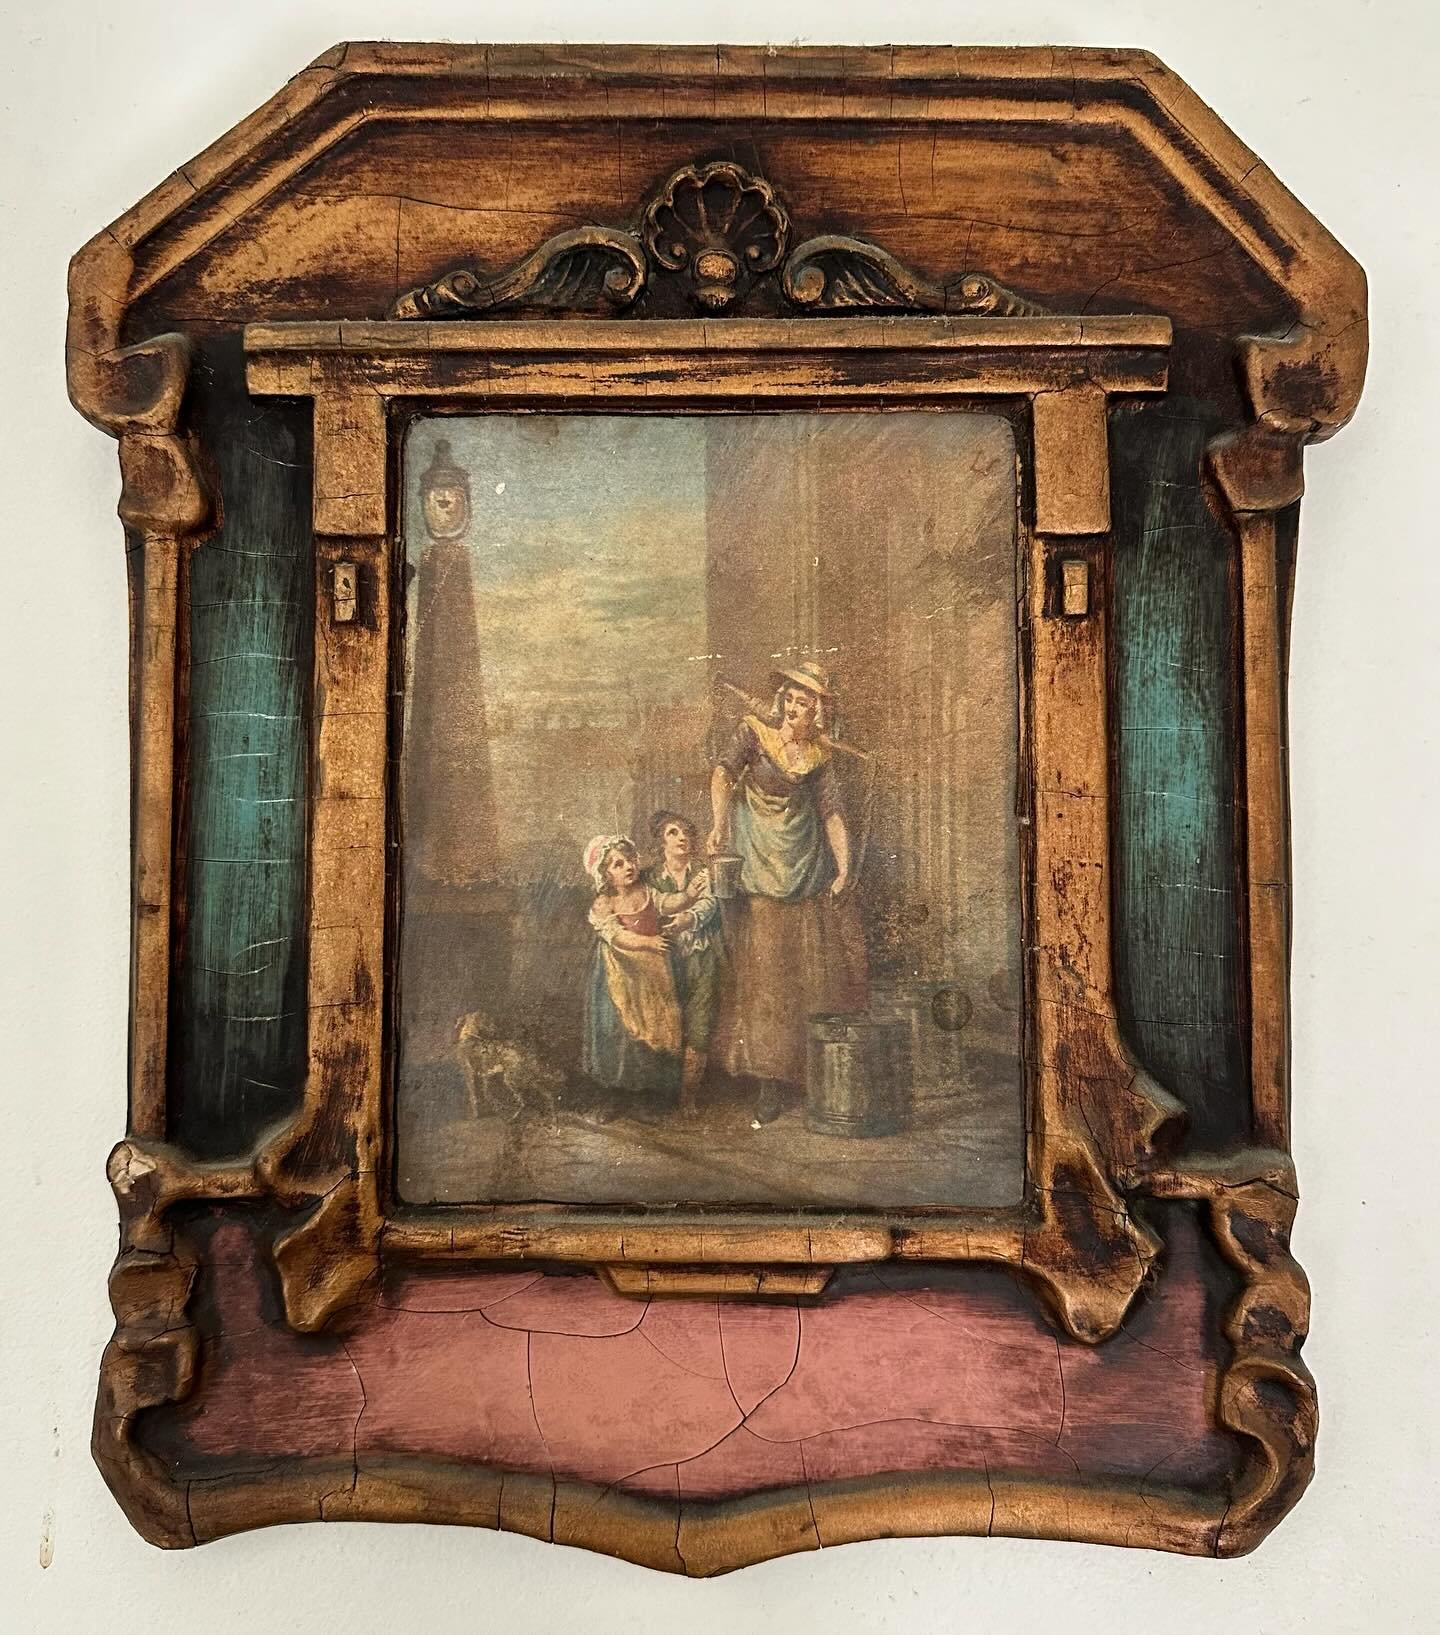 A gorgeous little frame I discovered on a visit to family recently! I&rsquo;m going to have to try and make one&hellip;.. in my (non existent) spare time! #framingfabulous #framinggoals #goals #antiqueframes #framenerd #loveframes #bestintentions